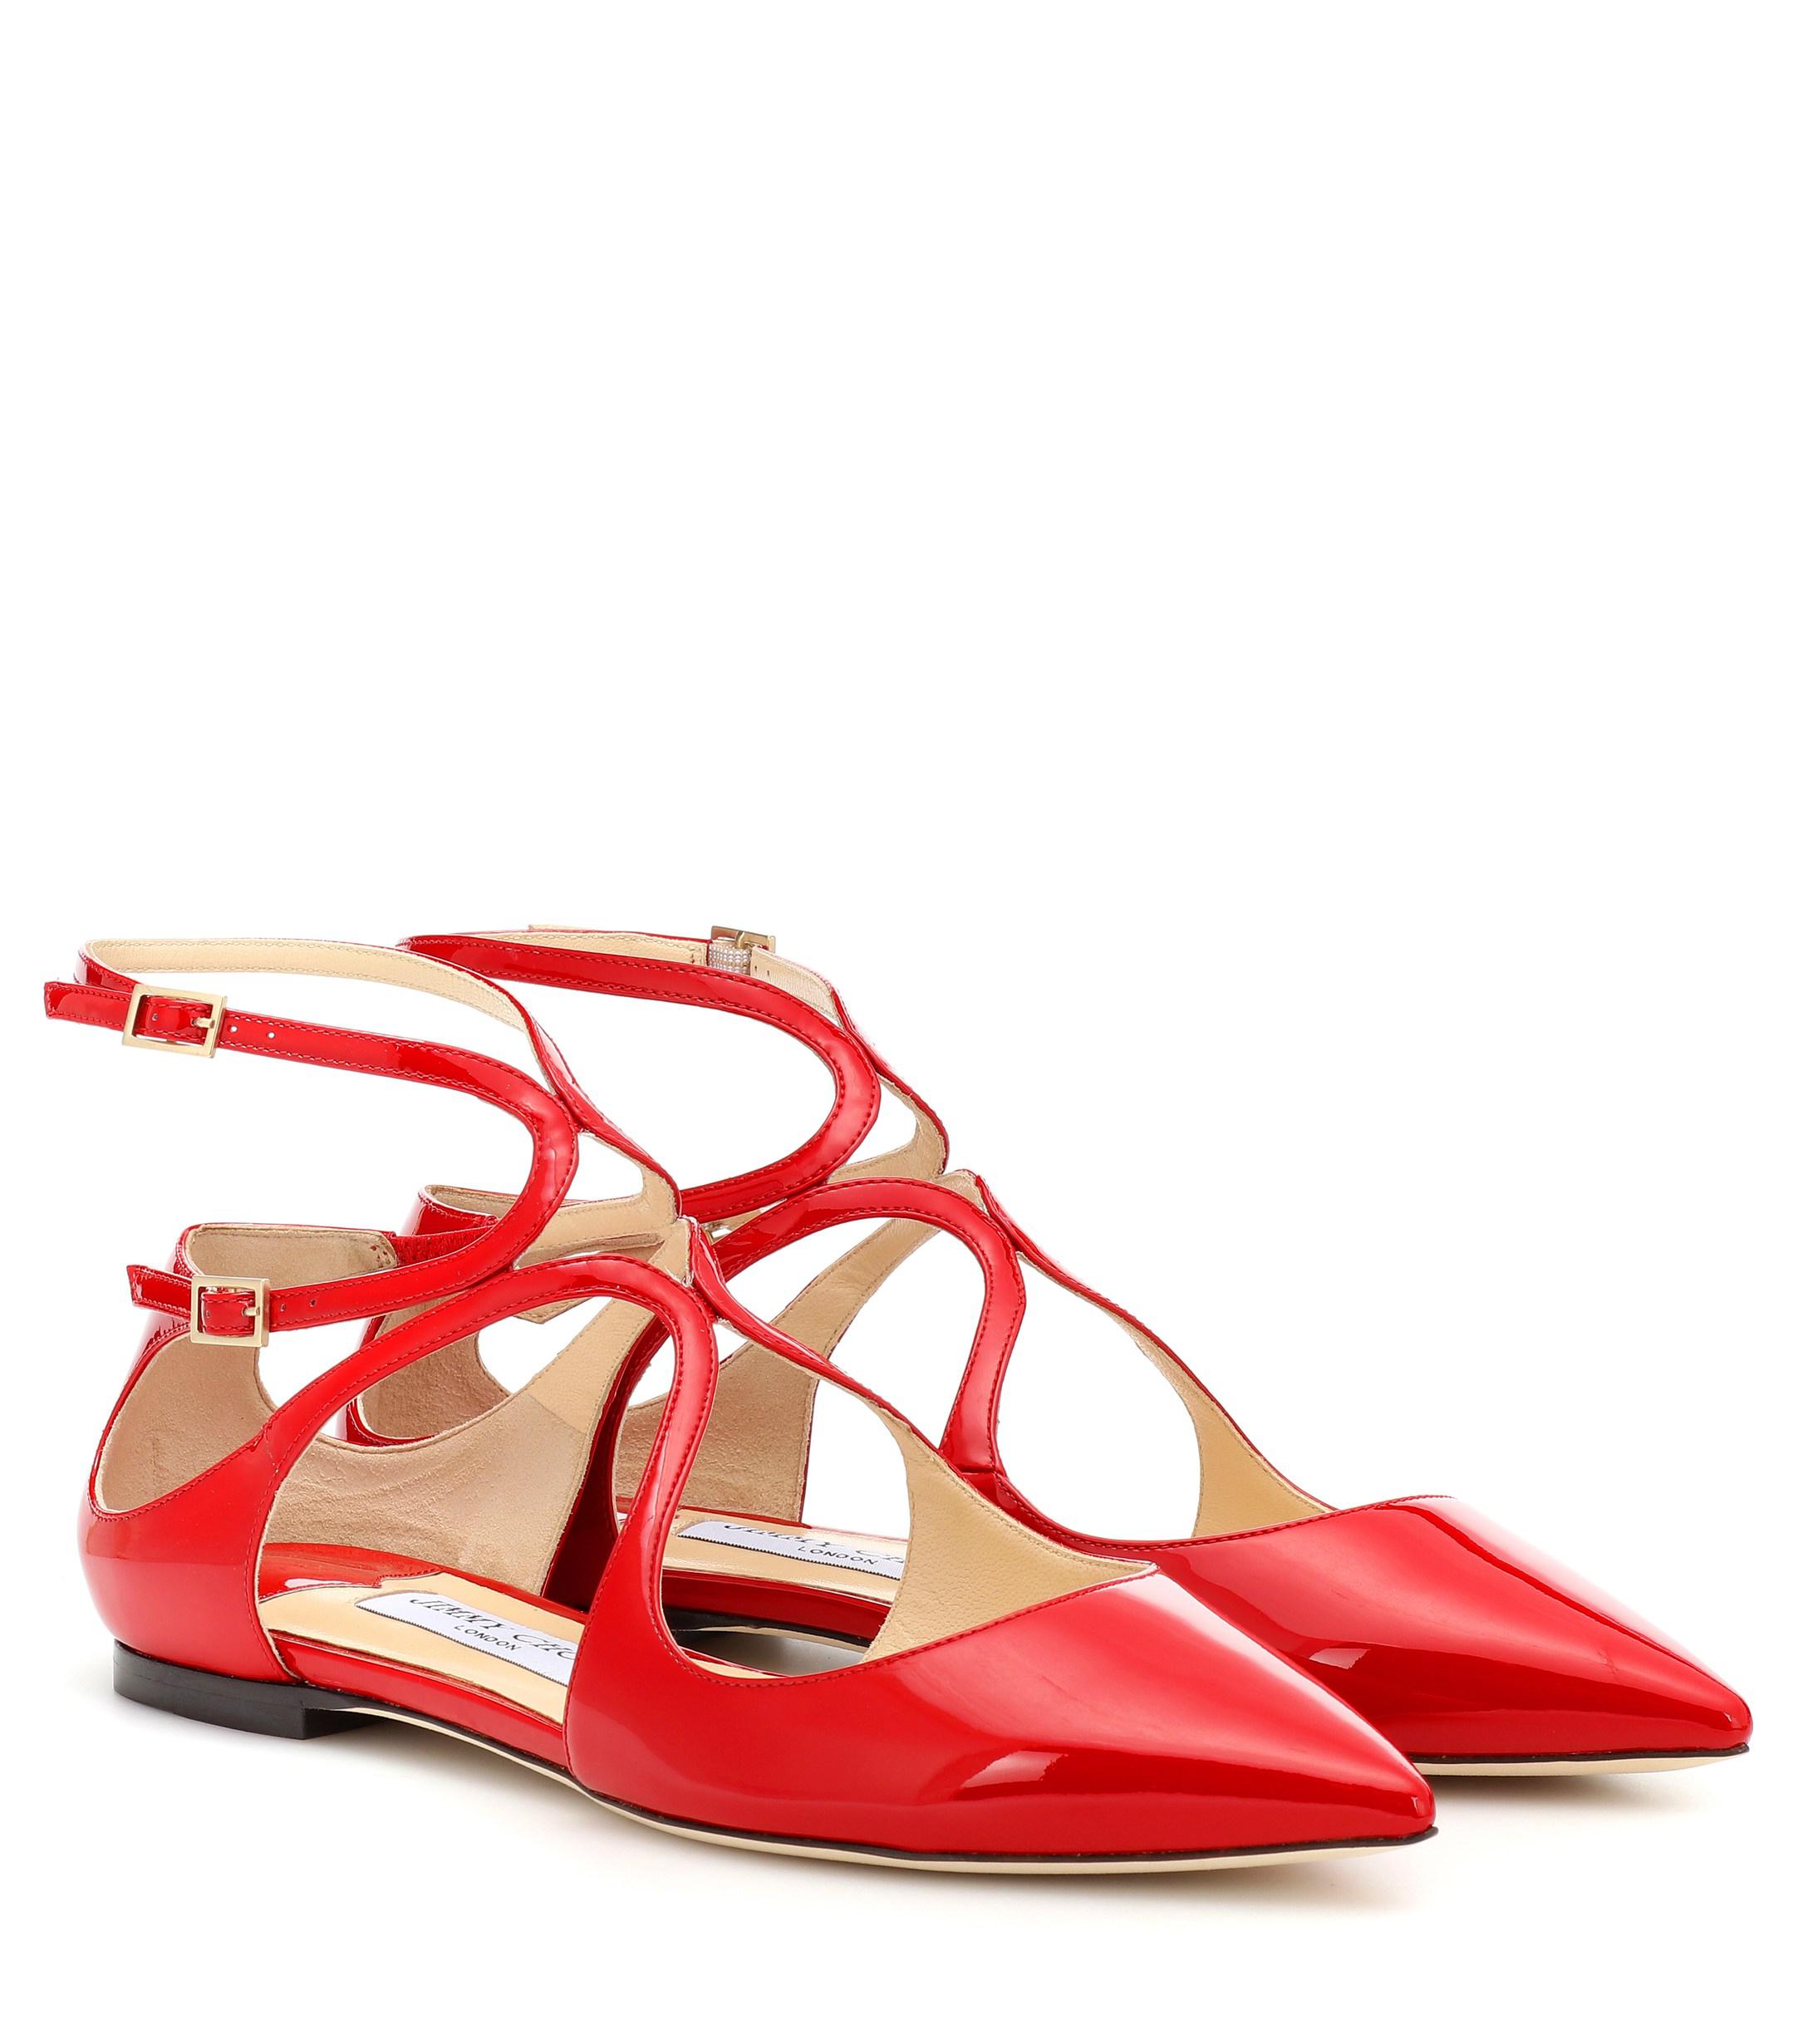 Jimmy Choo Lancer Patent Leather Ballet Flats in Red - Save 6% - Lyst